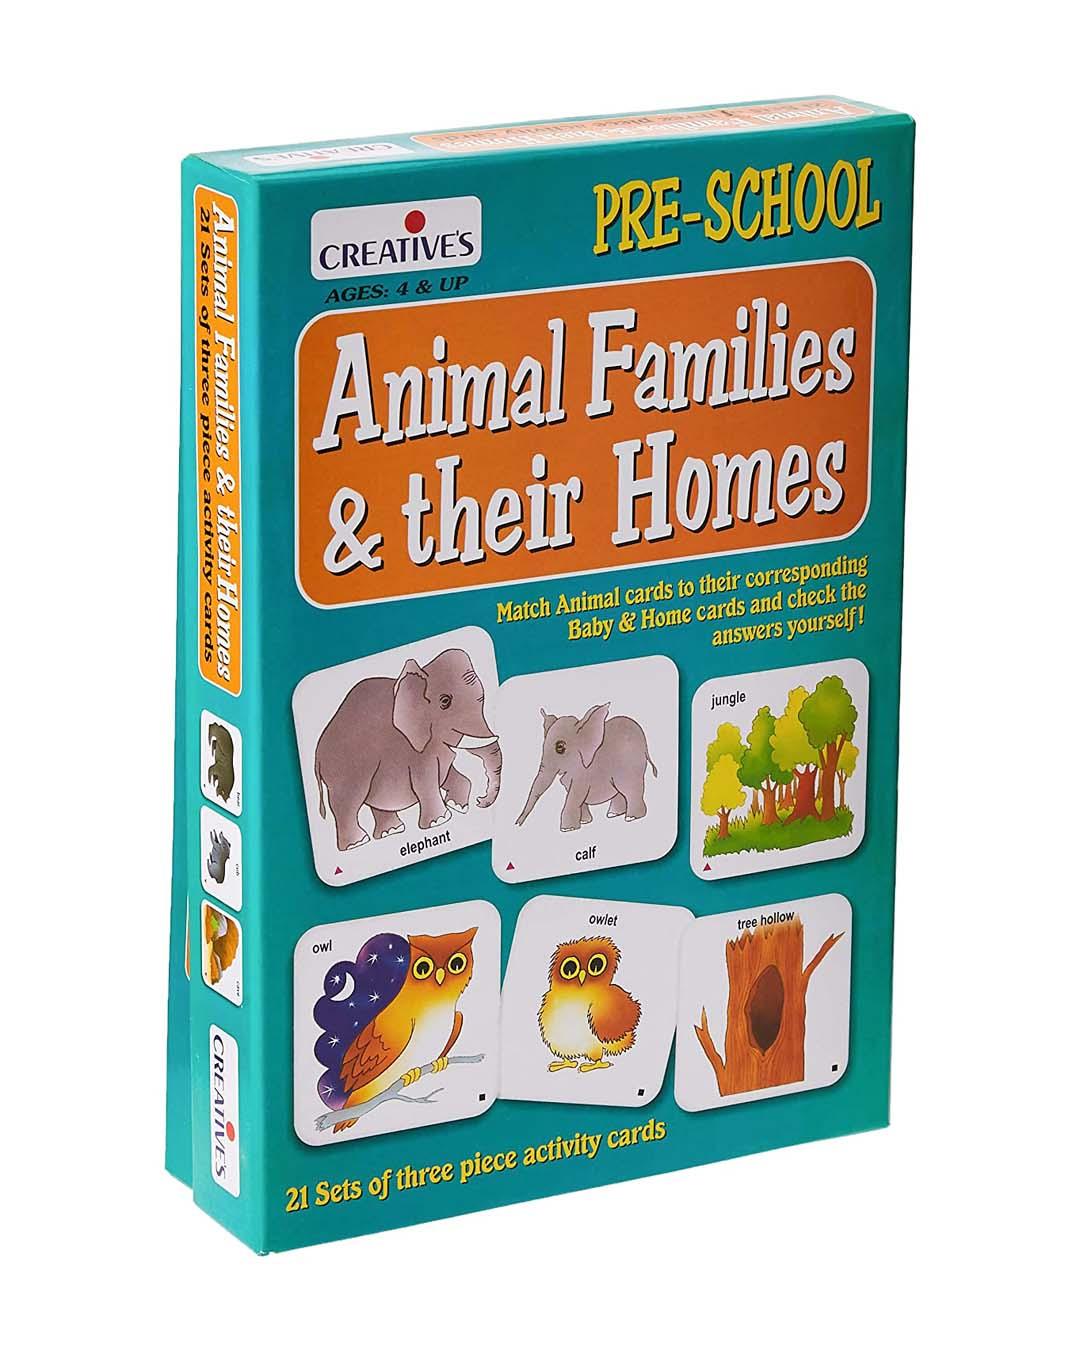 Creative Animal Families & Their Homes (21 Sets of three Pieces) Pre School for Kid - For Child 4 & Up - MARKET 99